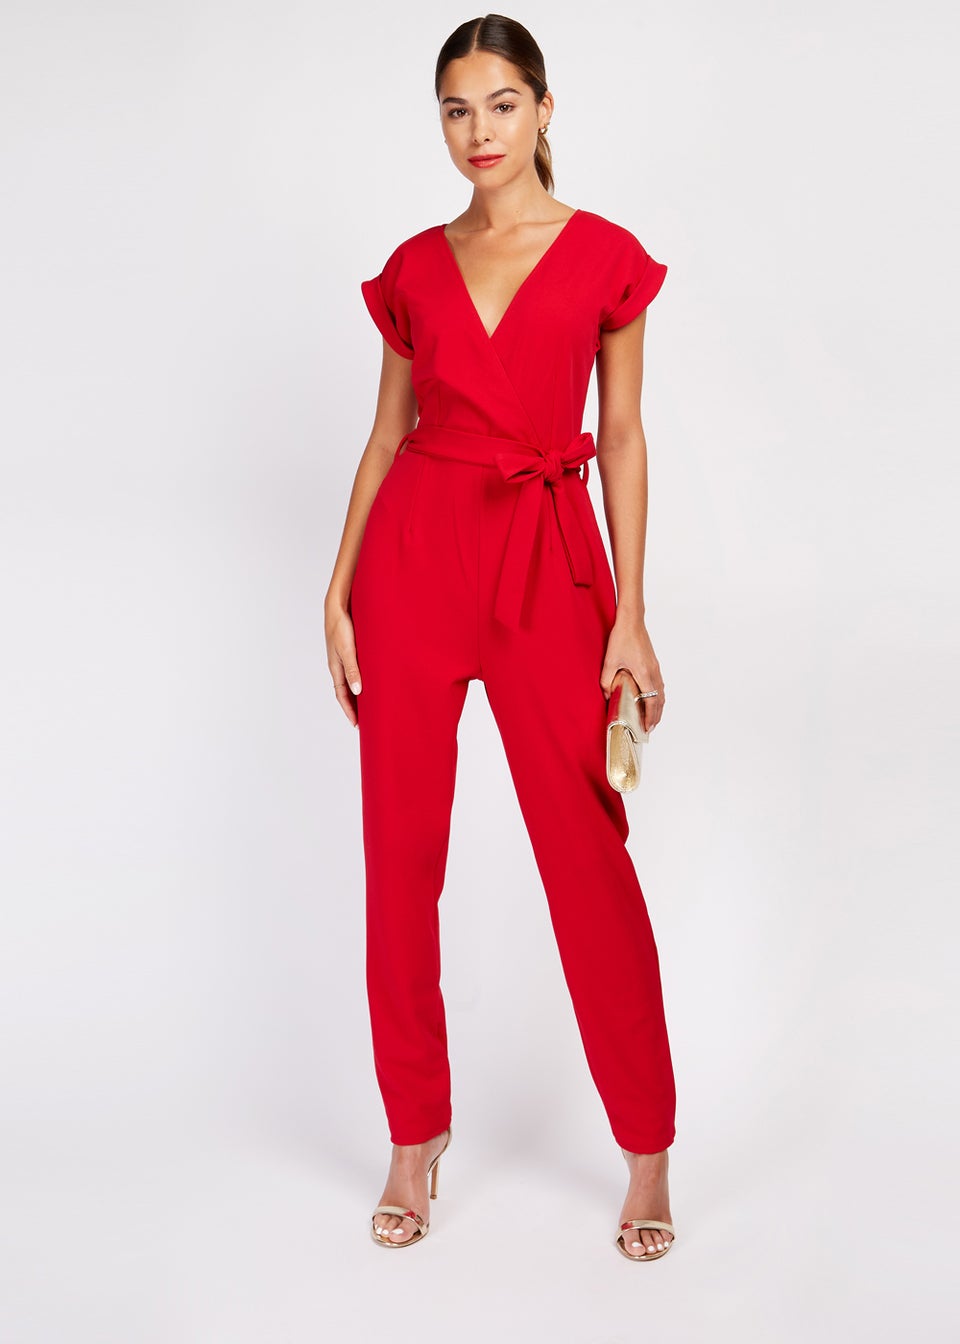 Girls on Film Red Stretch Crepe Jumpsuit - Matalan